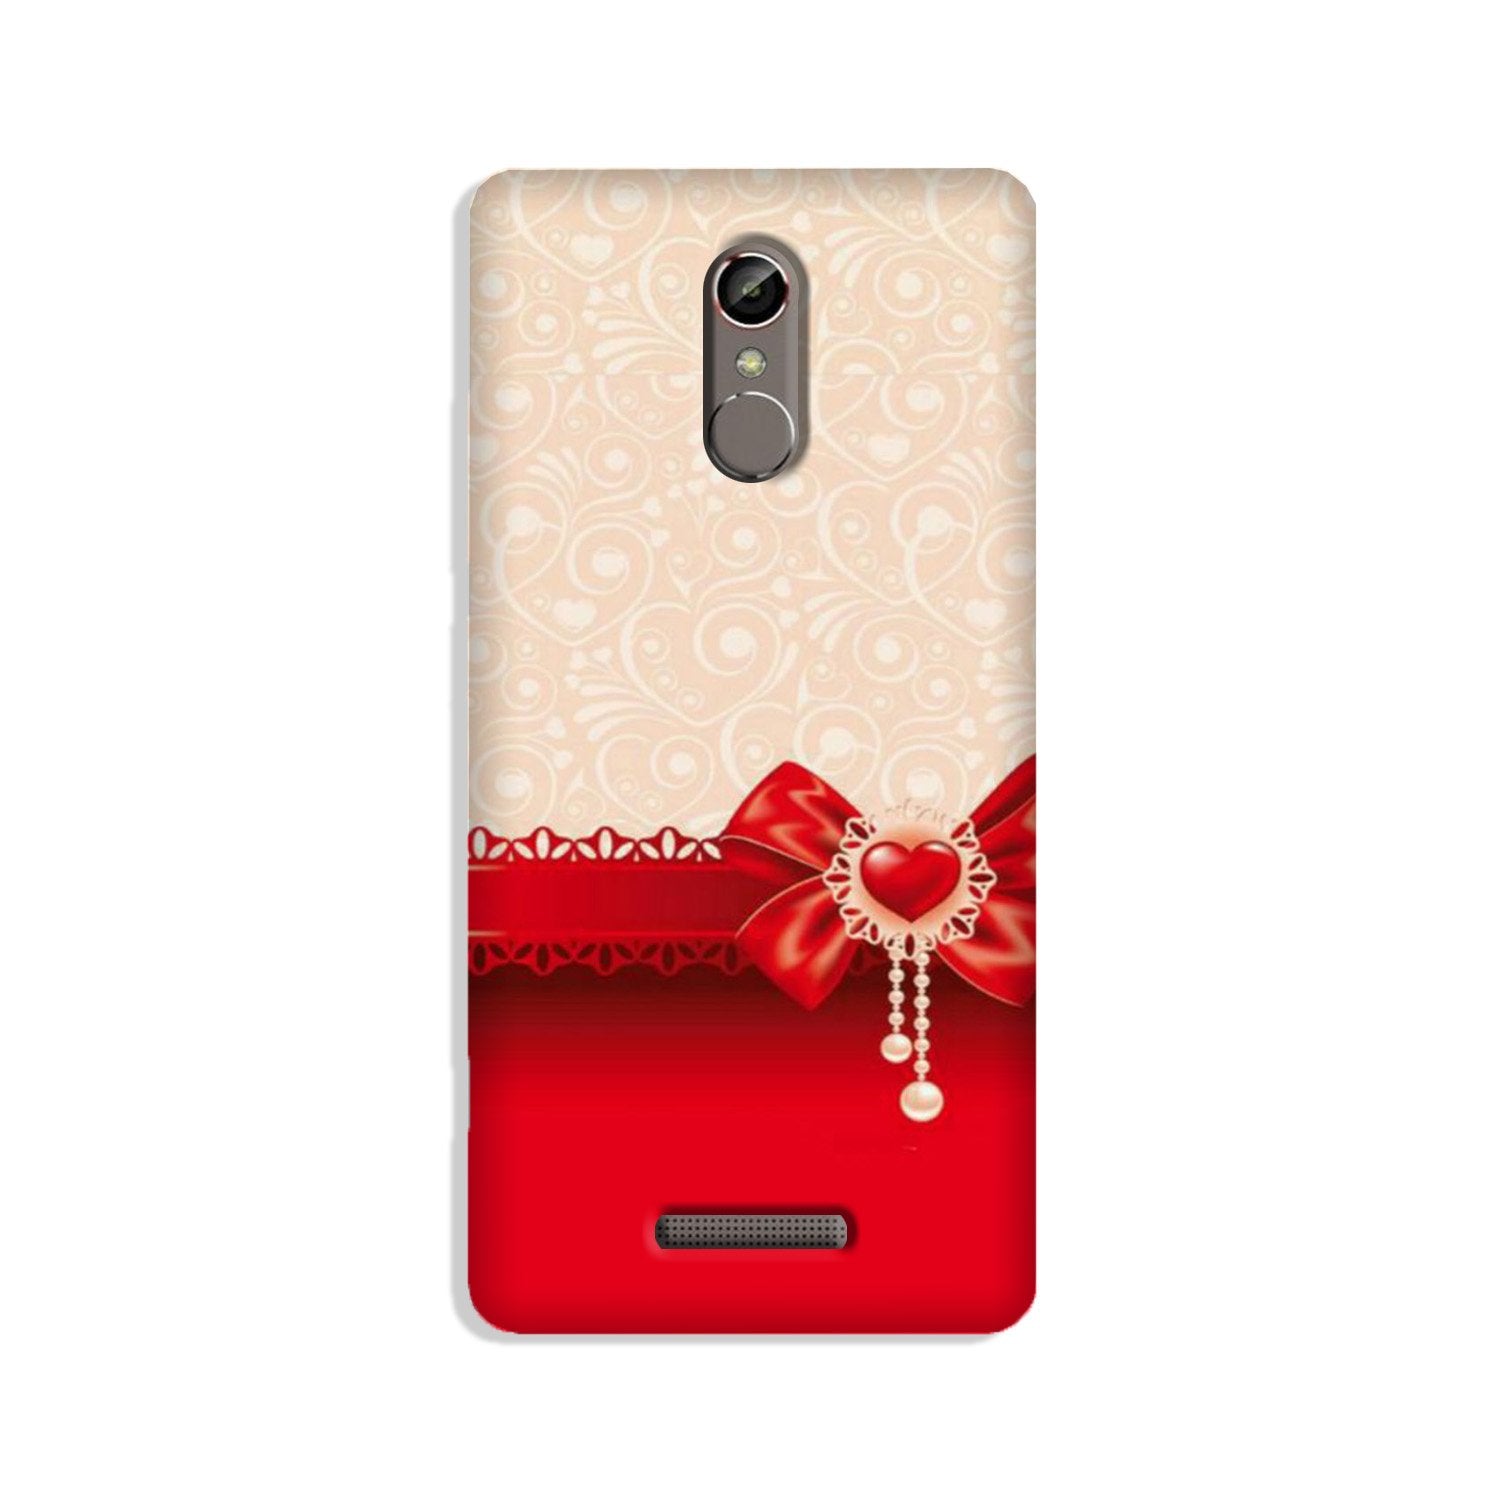 Gift Wrap3 Case for Gionee S6s